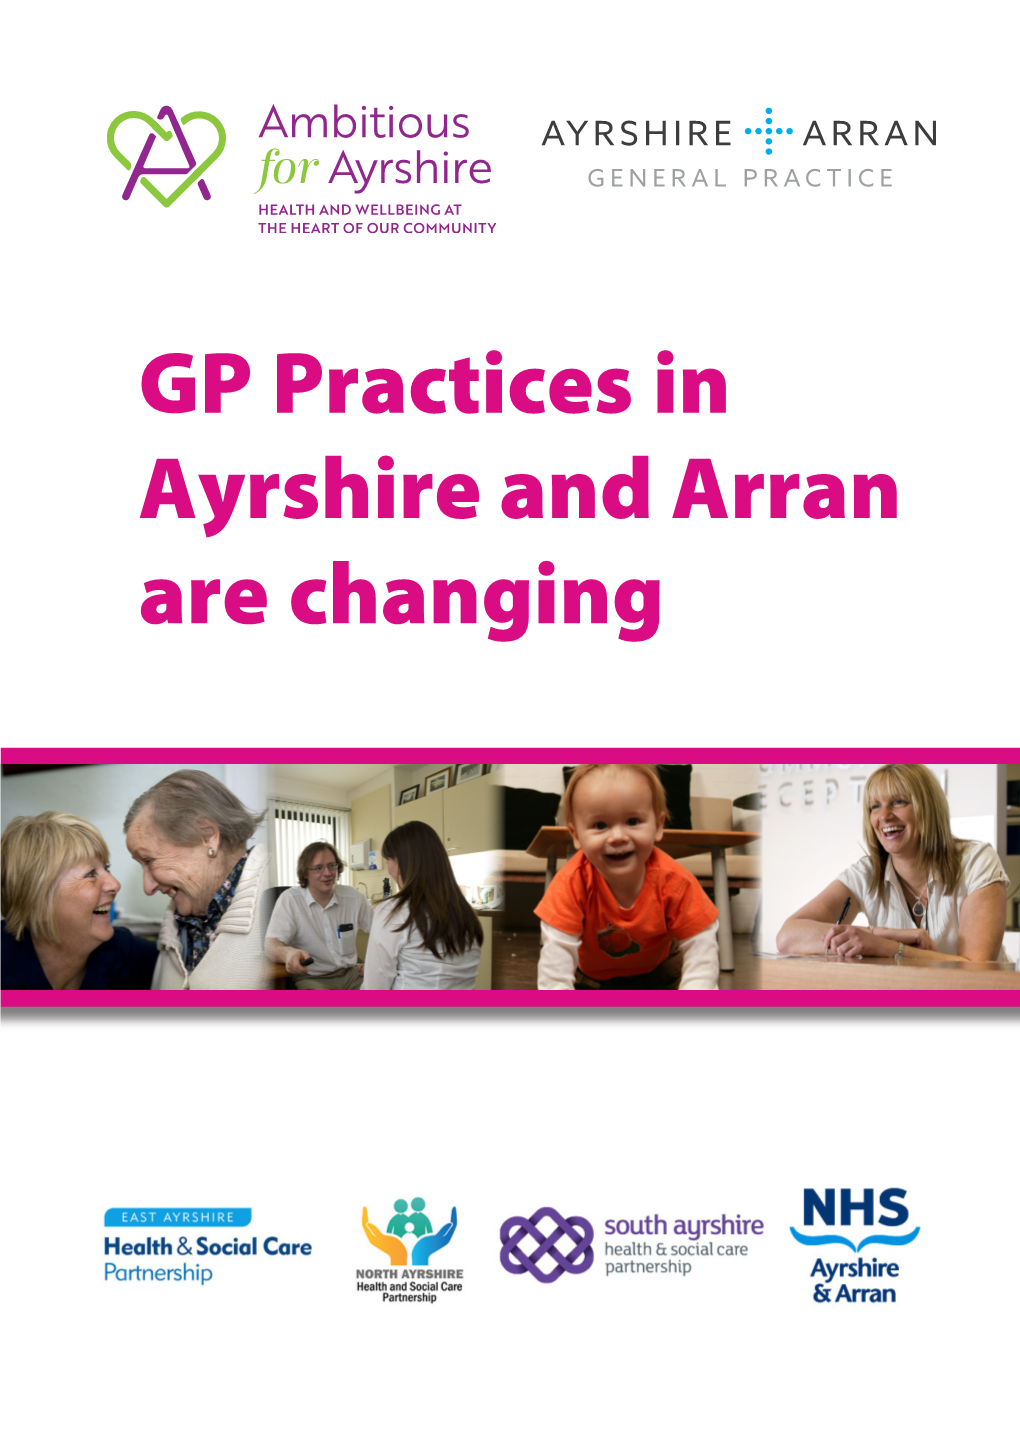 GP Practices in Ayrshire and Arran Are Changing